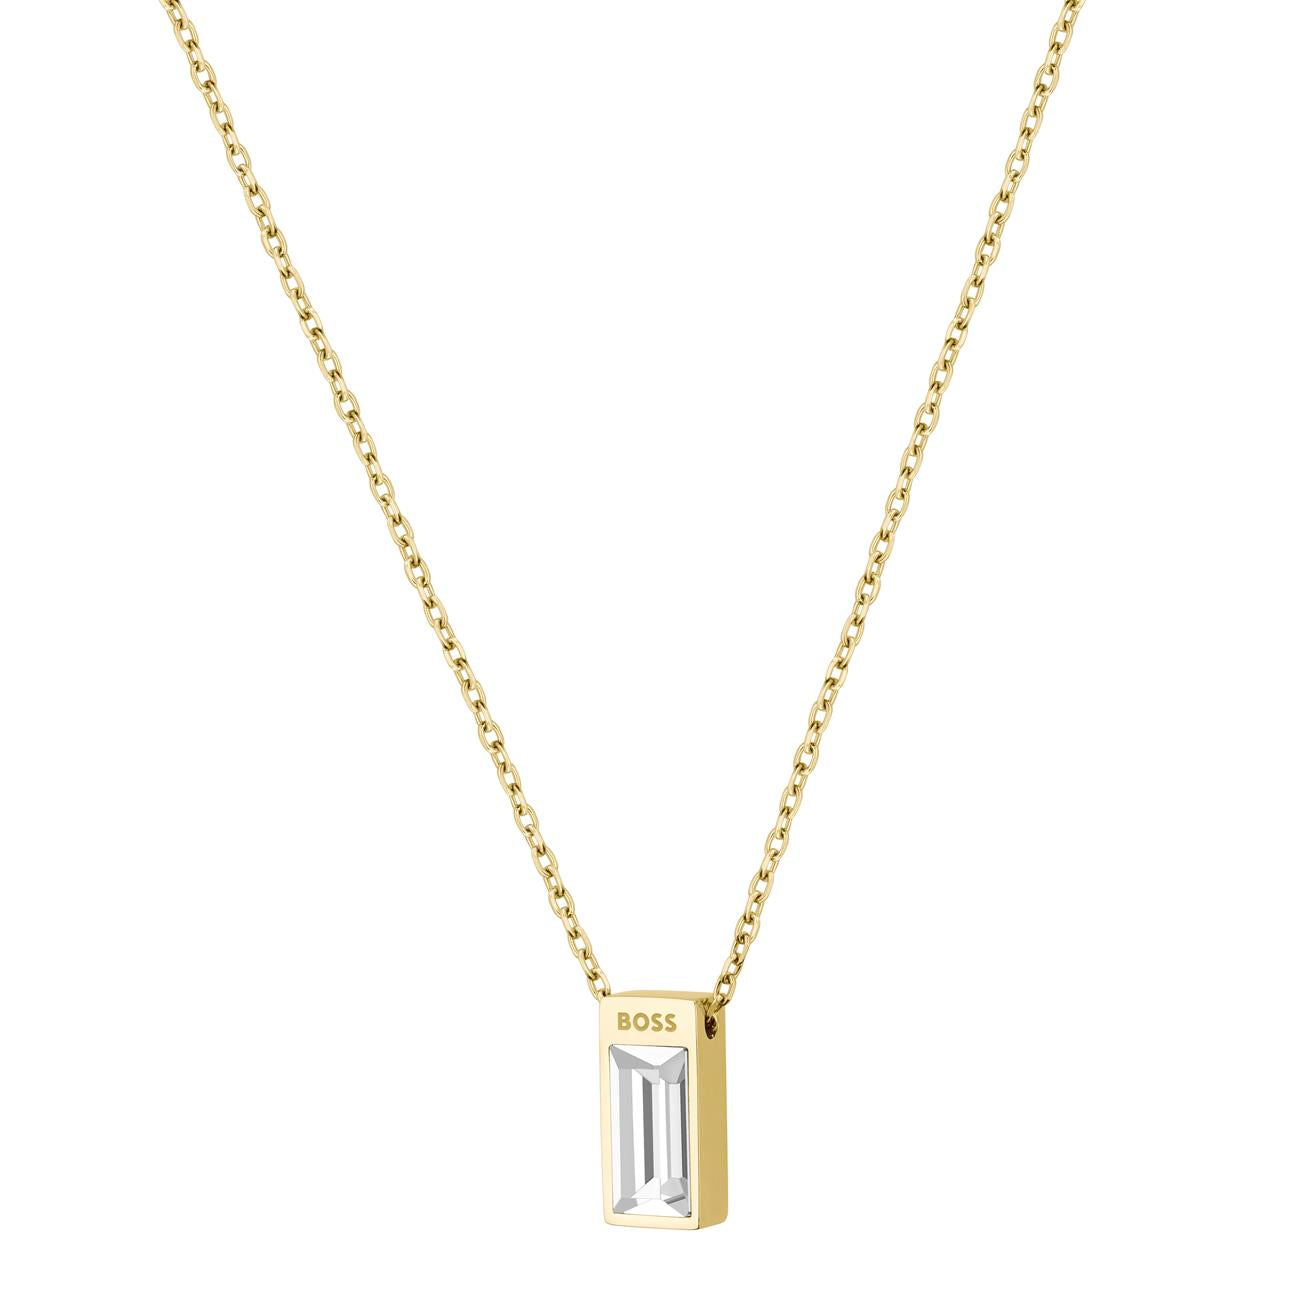 Boss Ladies Clia Gold Crystal Necklace 1580409